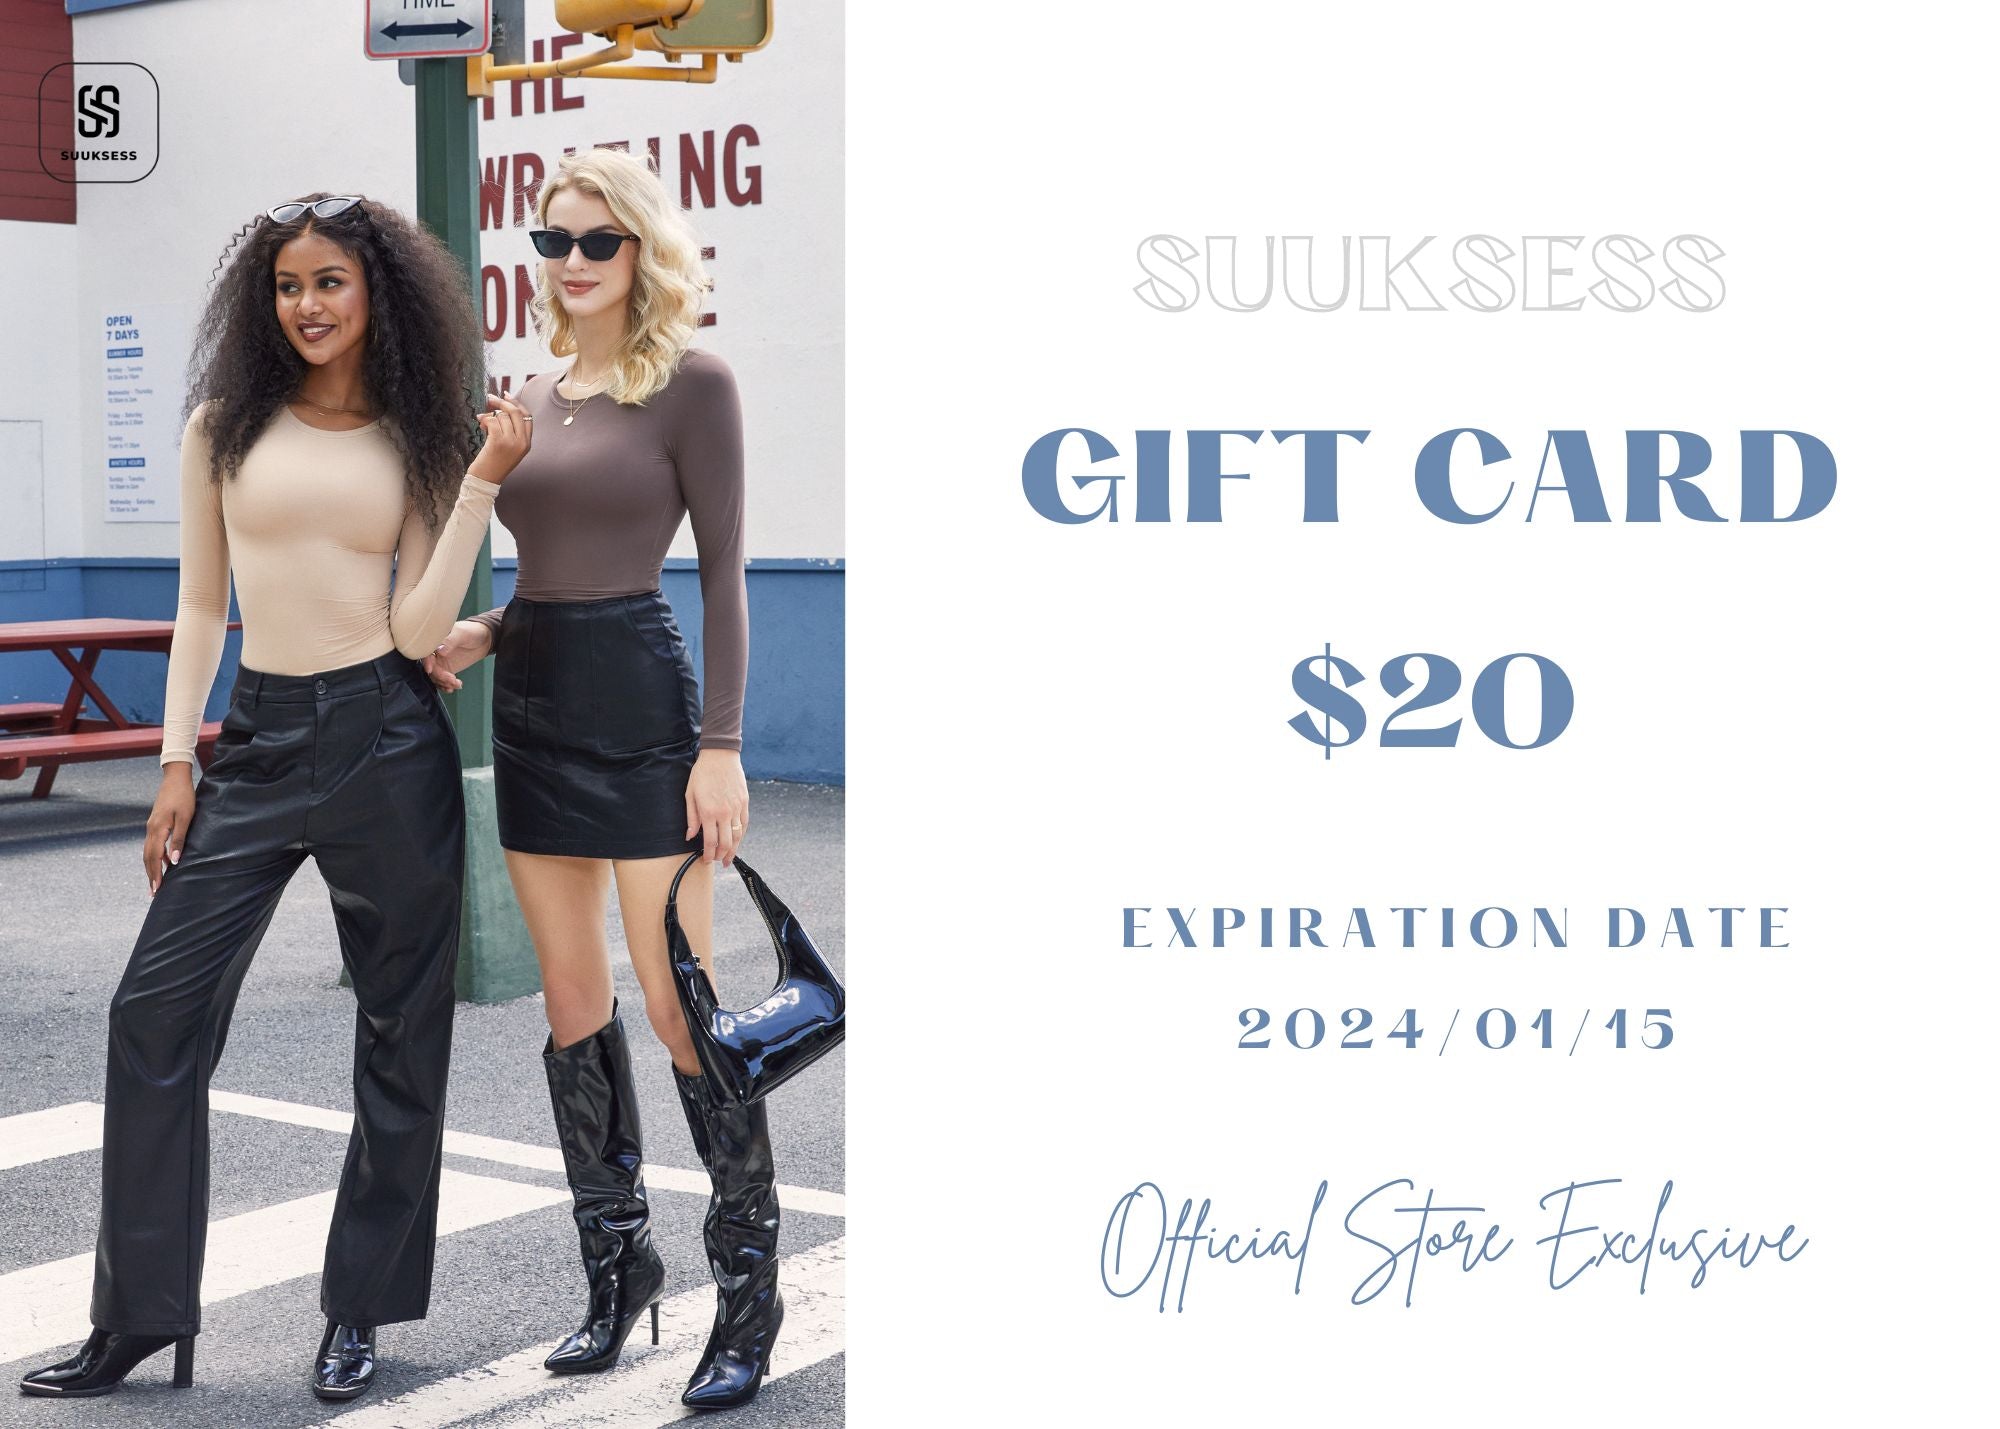 Suuksess Holiday Gift Cards